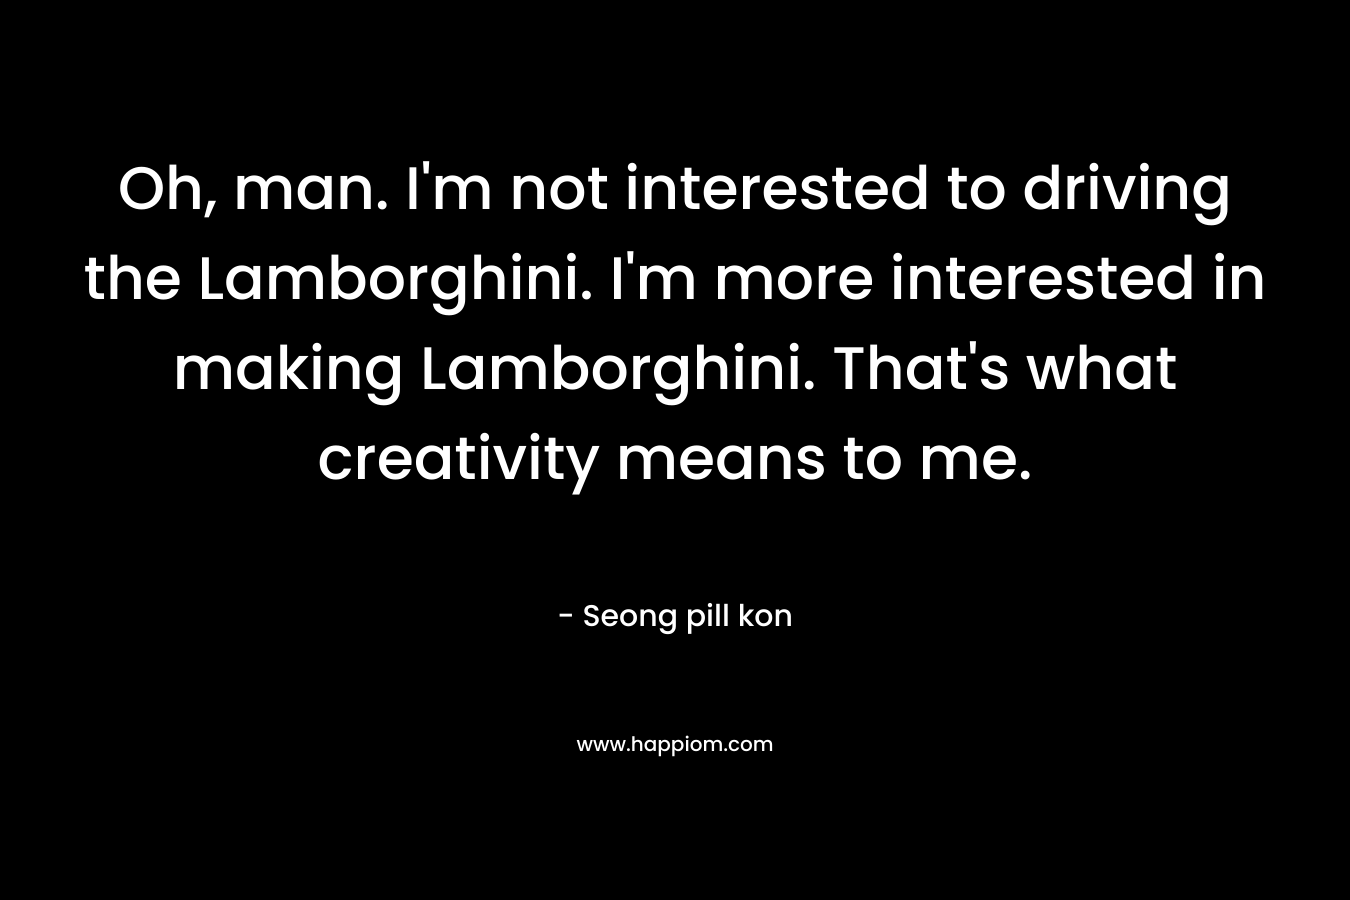 Oh, man. I'm not interested to driving the Lamborghini. I'm more interested in making Lamborghini. That's what creativity means to me.